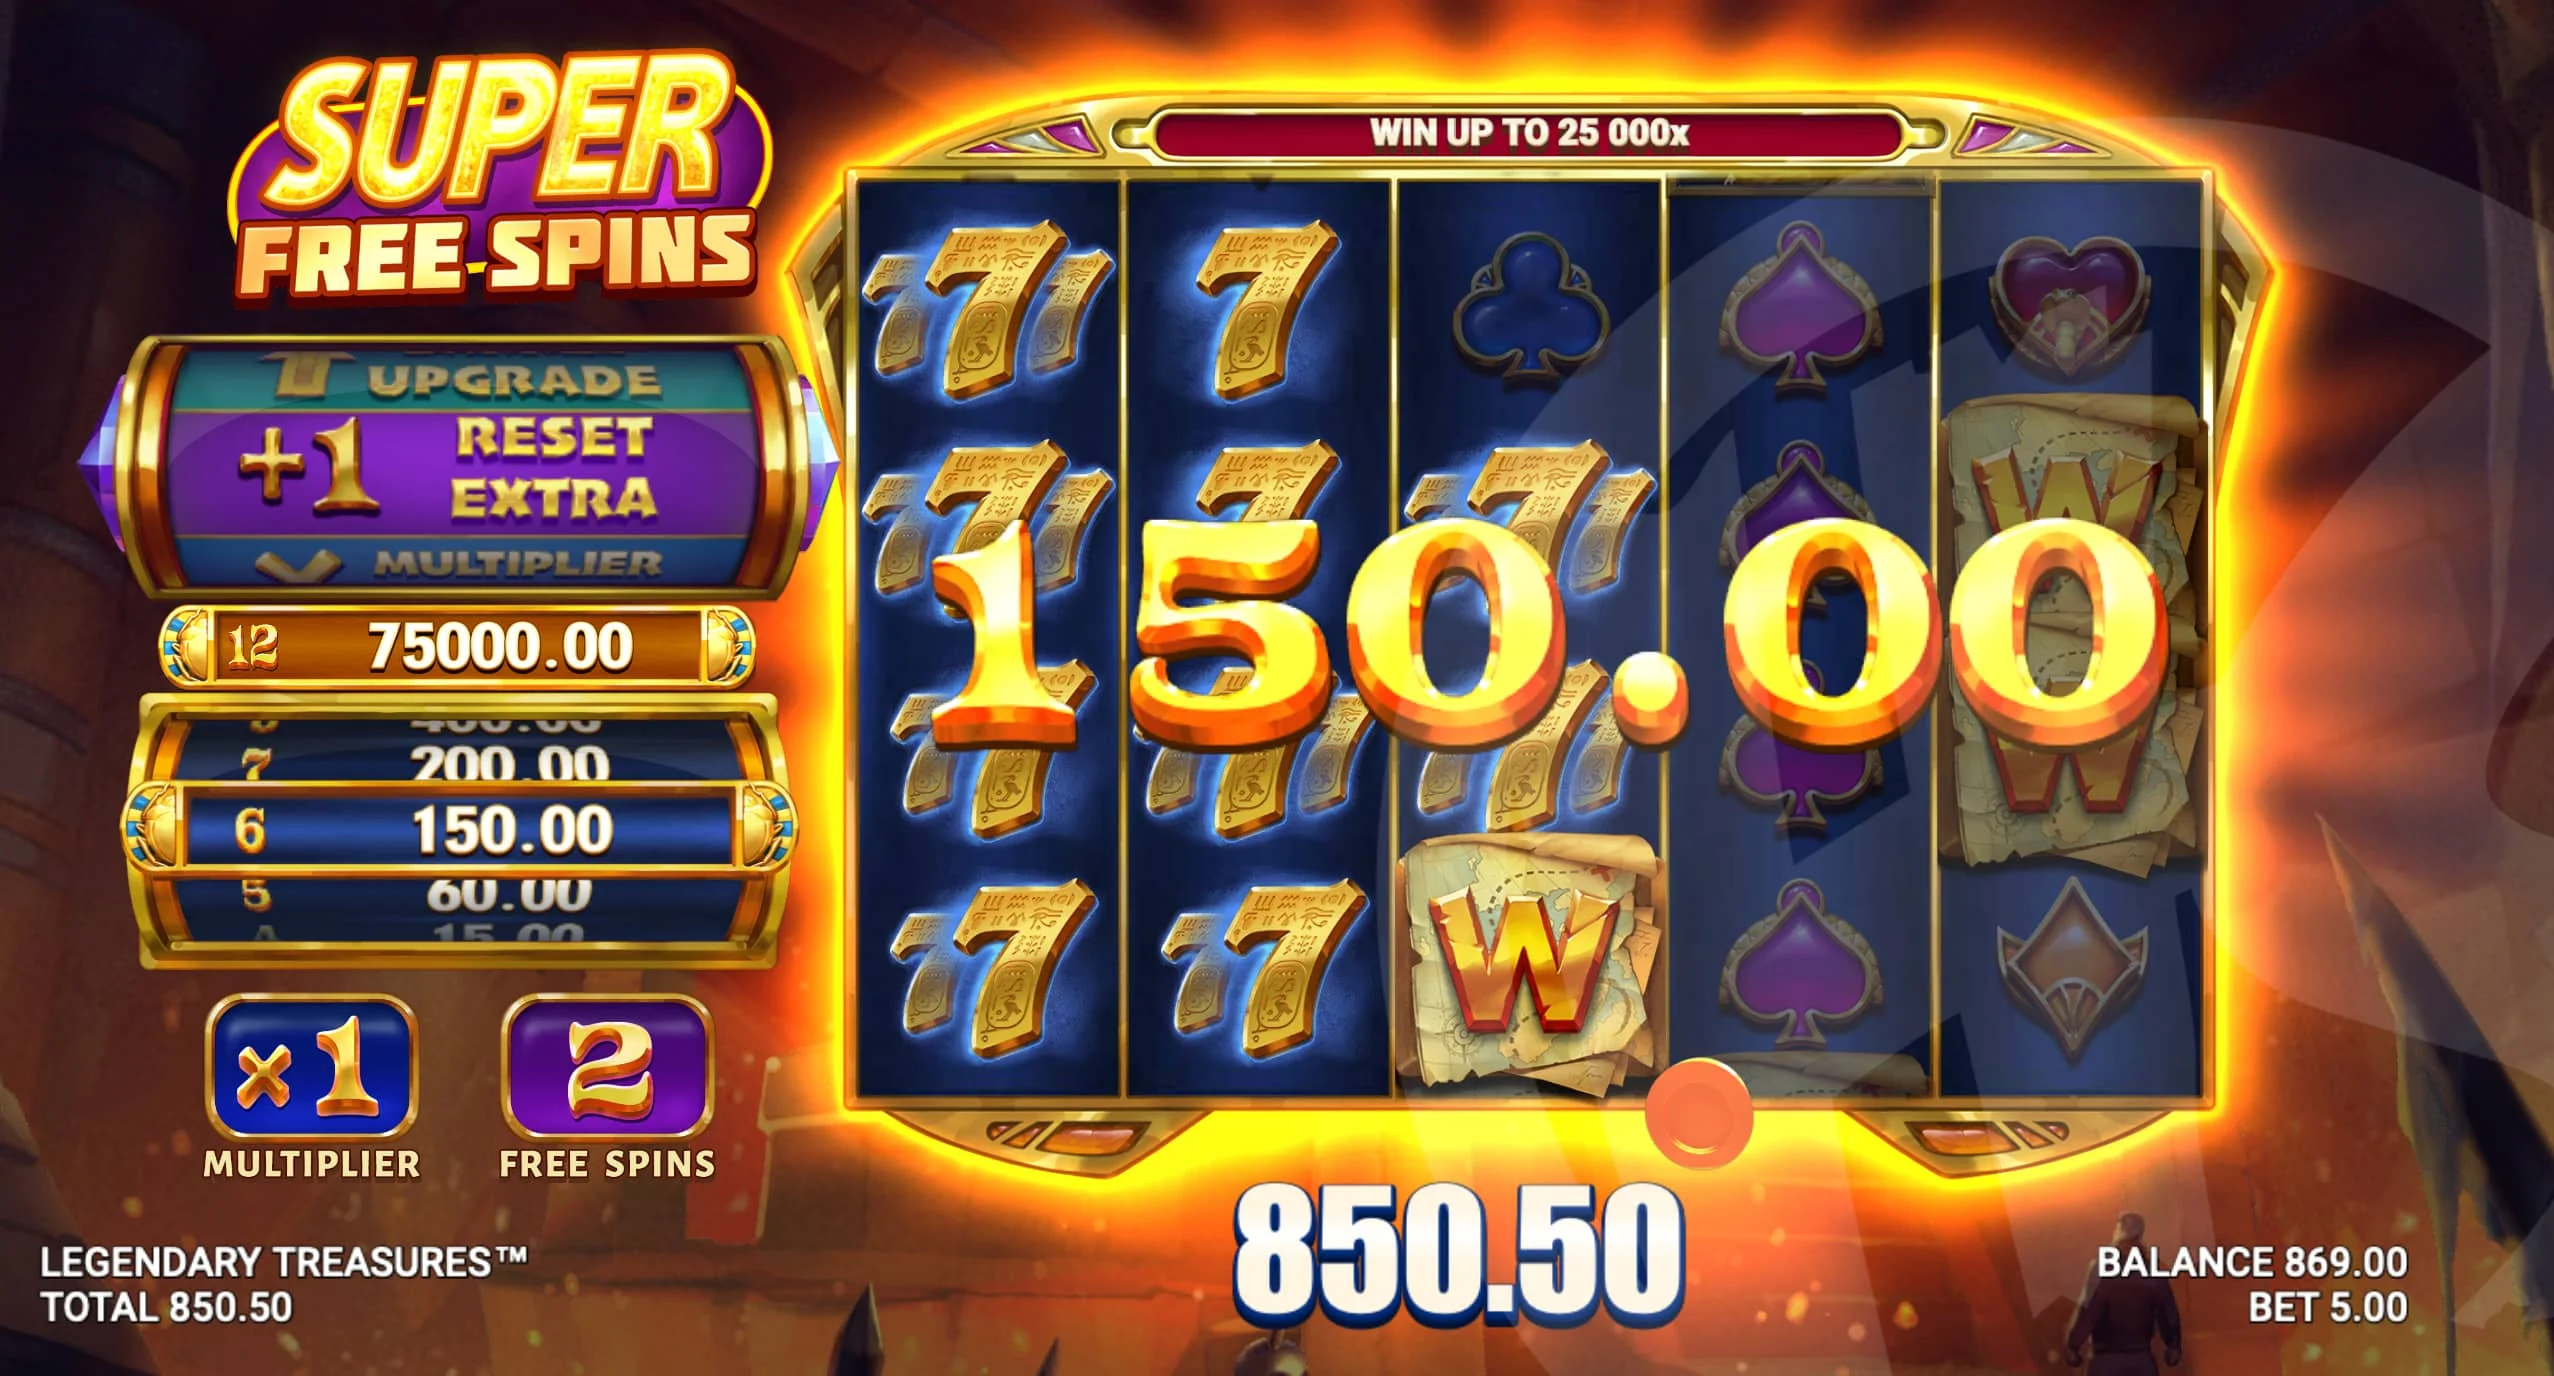 The Current Prize on the Treasure Barrel Pays Out at the End of Every Spin in Super Free Spins